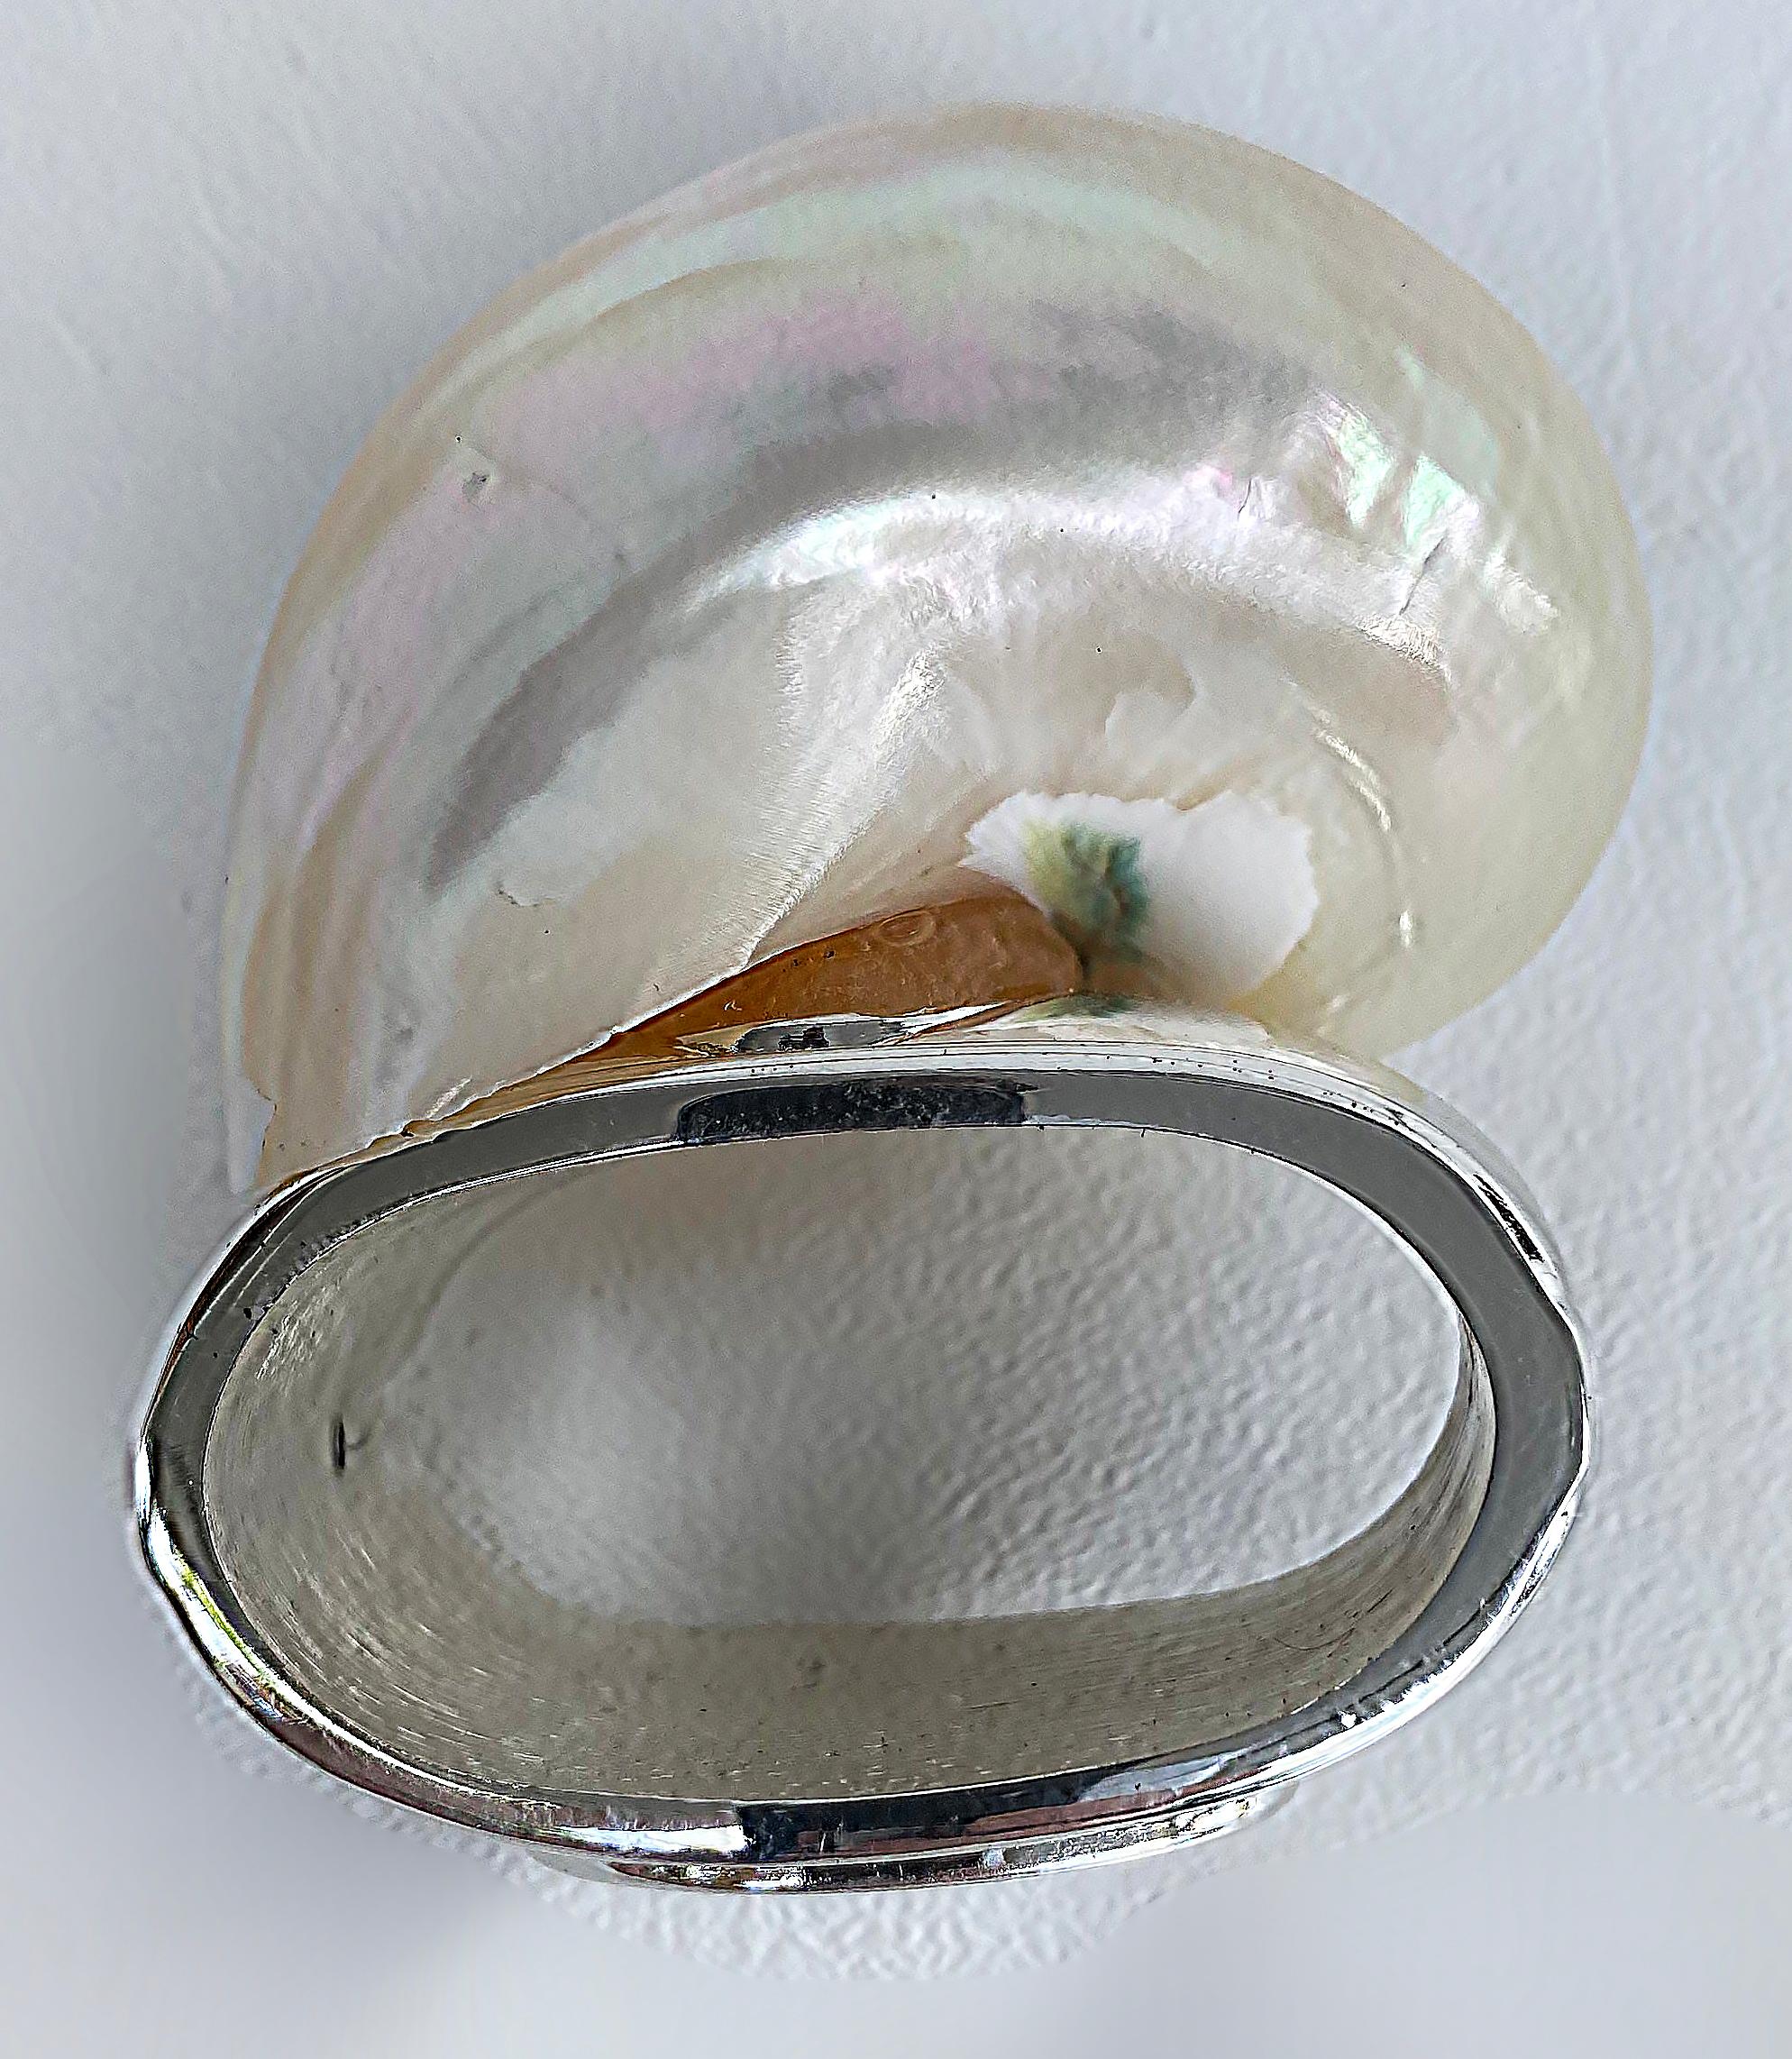 4 Hans Turnwald Sea Shell Silverplate Napkin Rings with Original Box

Offered for sale is a set of four Hans Turnwald seashell and silverplate napkin rings presented in their original box.  They are quite elegant and will make a lovely gift when